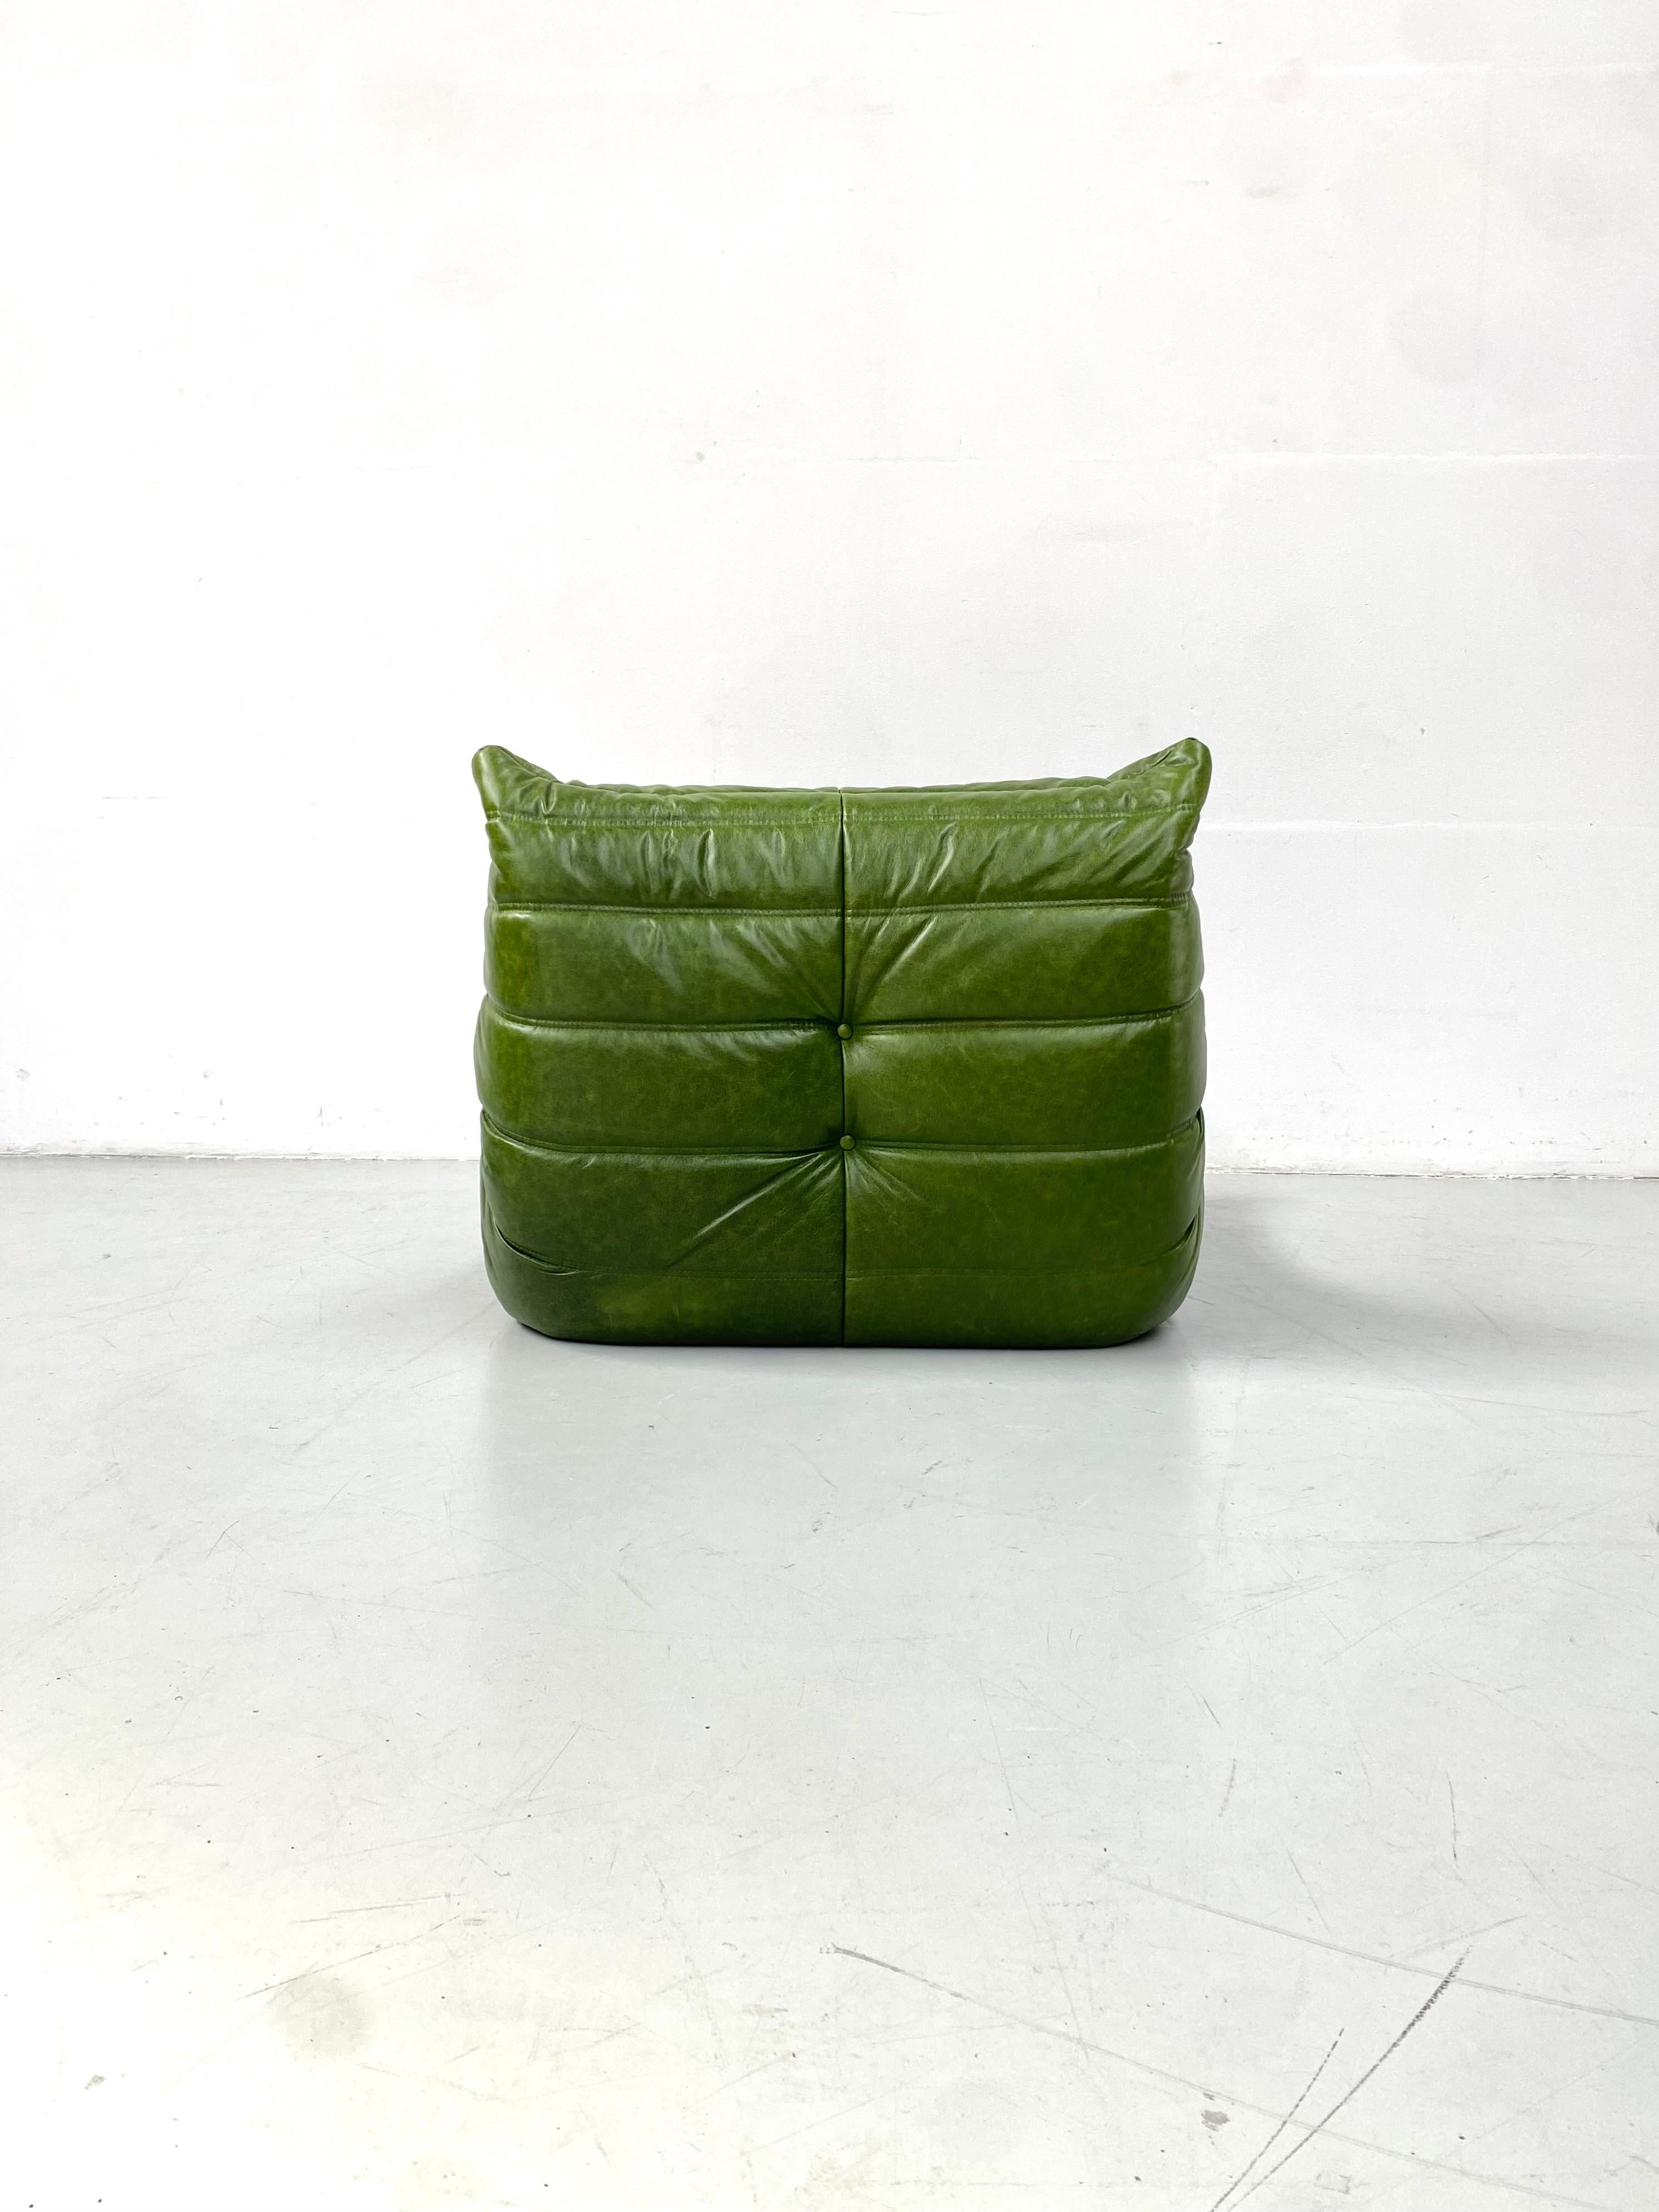 French Togo Chair in Green Leather by Michel Ducaroy for Ligne Roset, 1974. 3